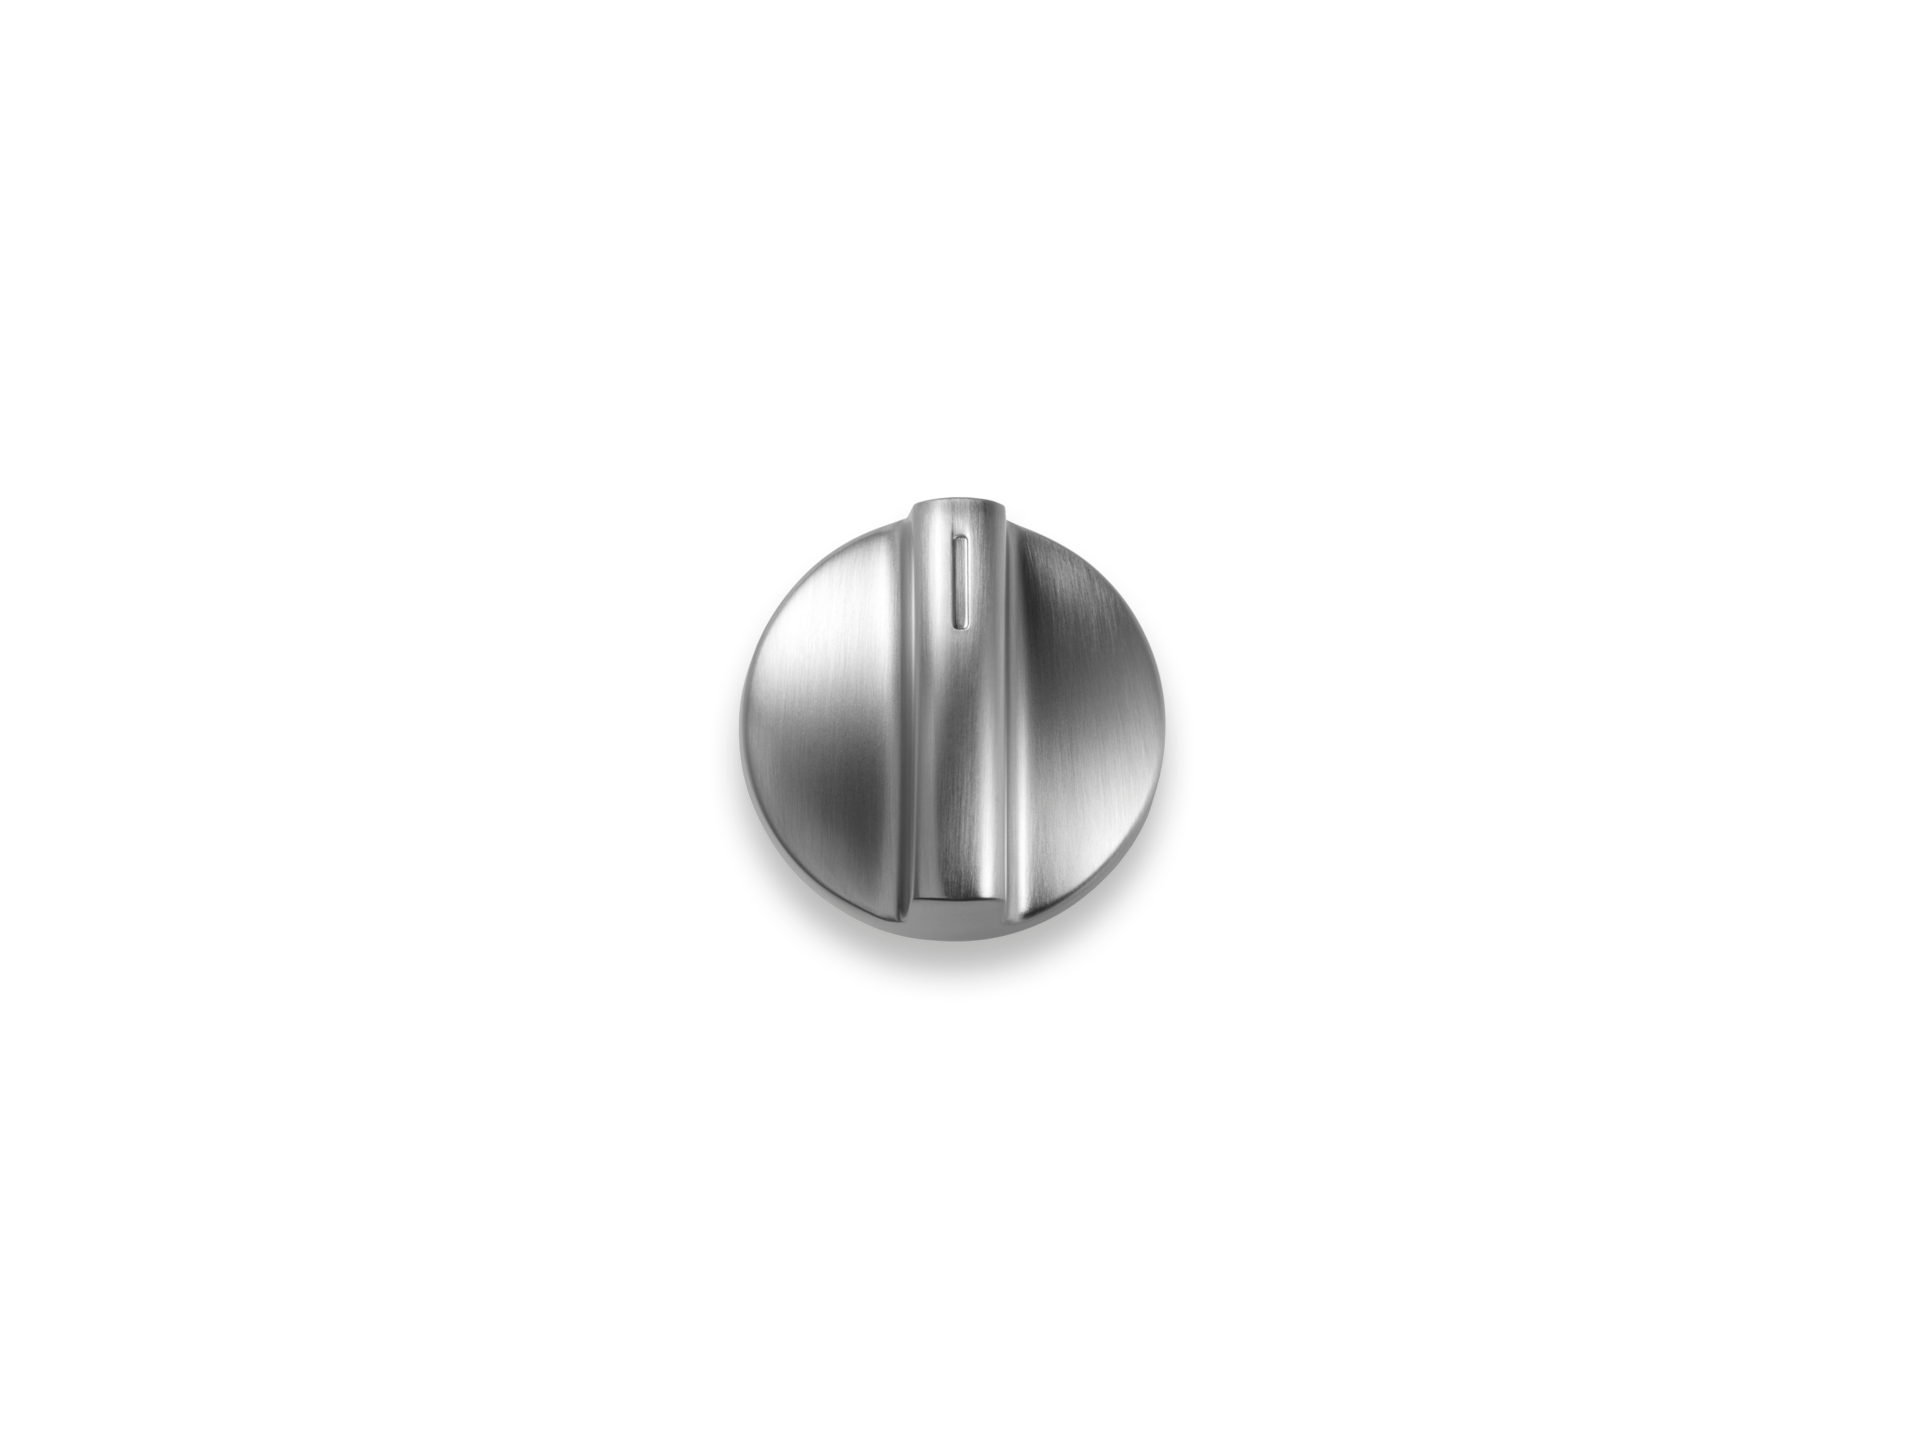 Spare parts - Domestic - Programme knob Stainless steel D 38mm - 1